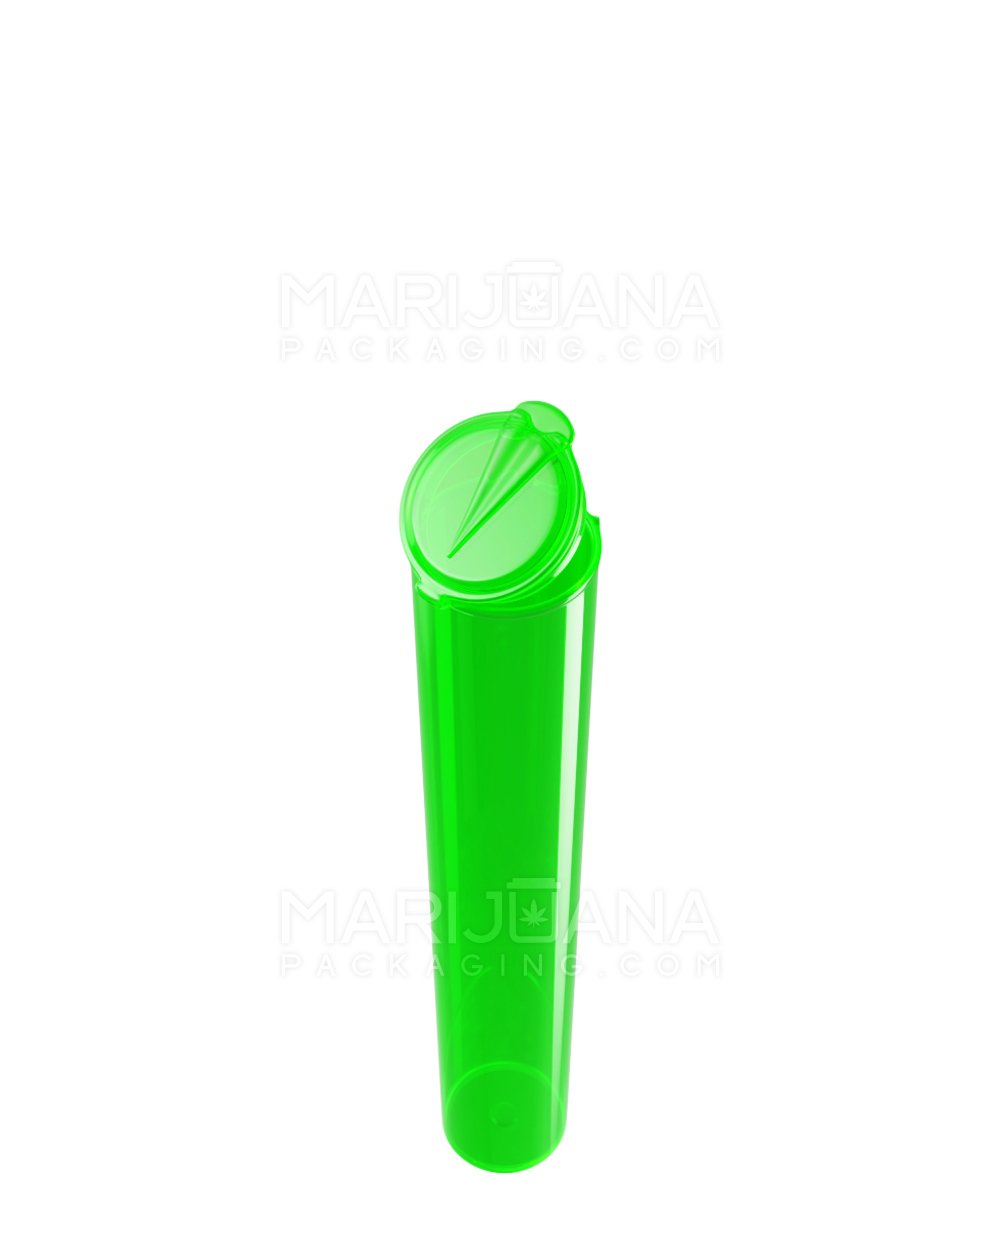 King Size Pop Top Translucent Plastic Pre-Roll Tubes | 116mm - Green - 100 Count - 4